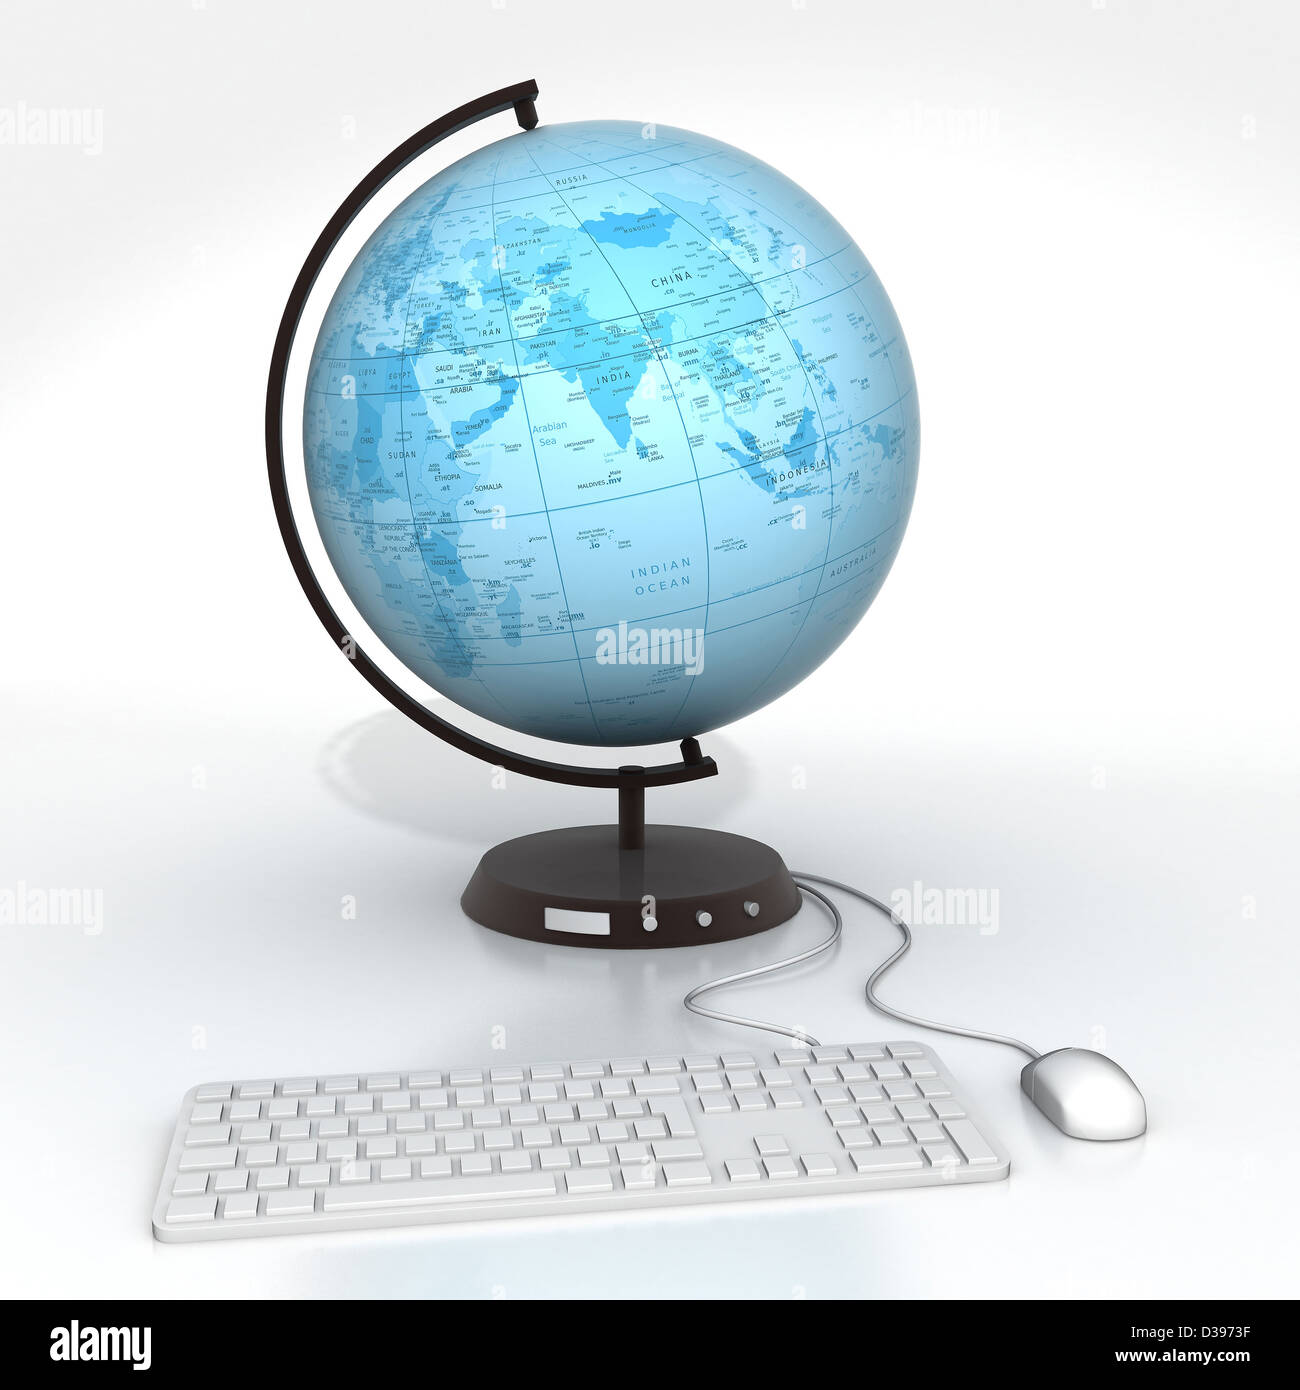 Conceptual image of desktop globe attached to computer keyboard and mouse depicting global communications Stock Photo